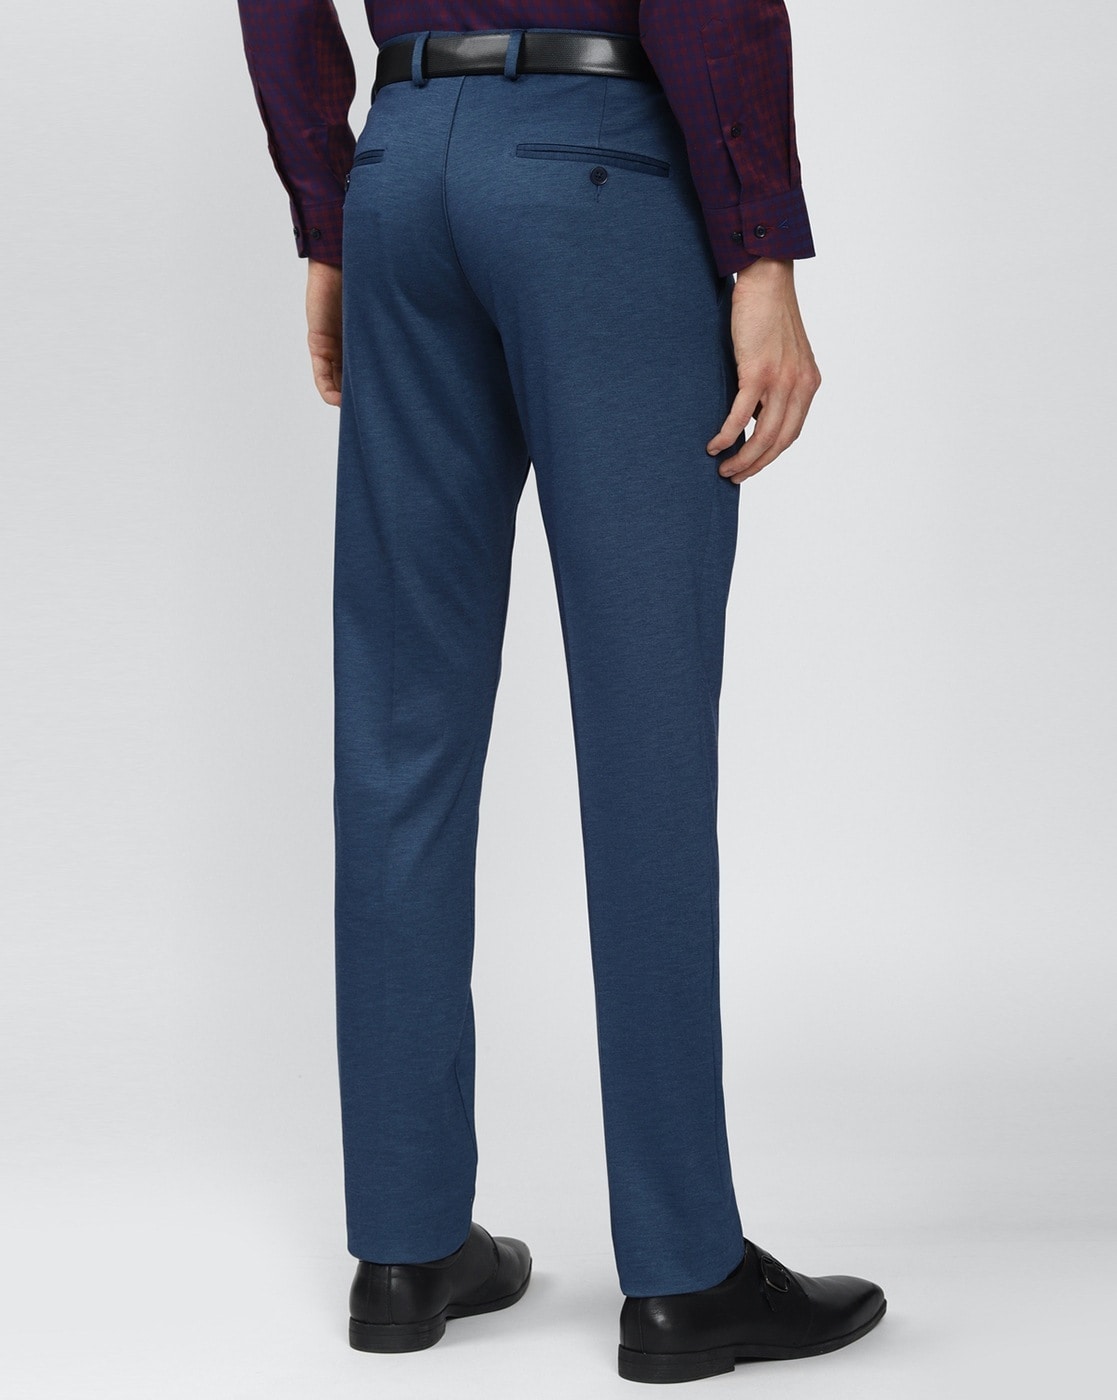 Midnight Navy Luxury Wool Blend Suit Pants - Unhemmed – PolishedThreads.com